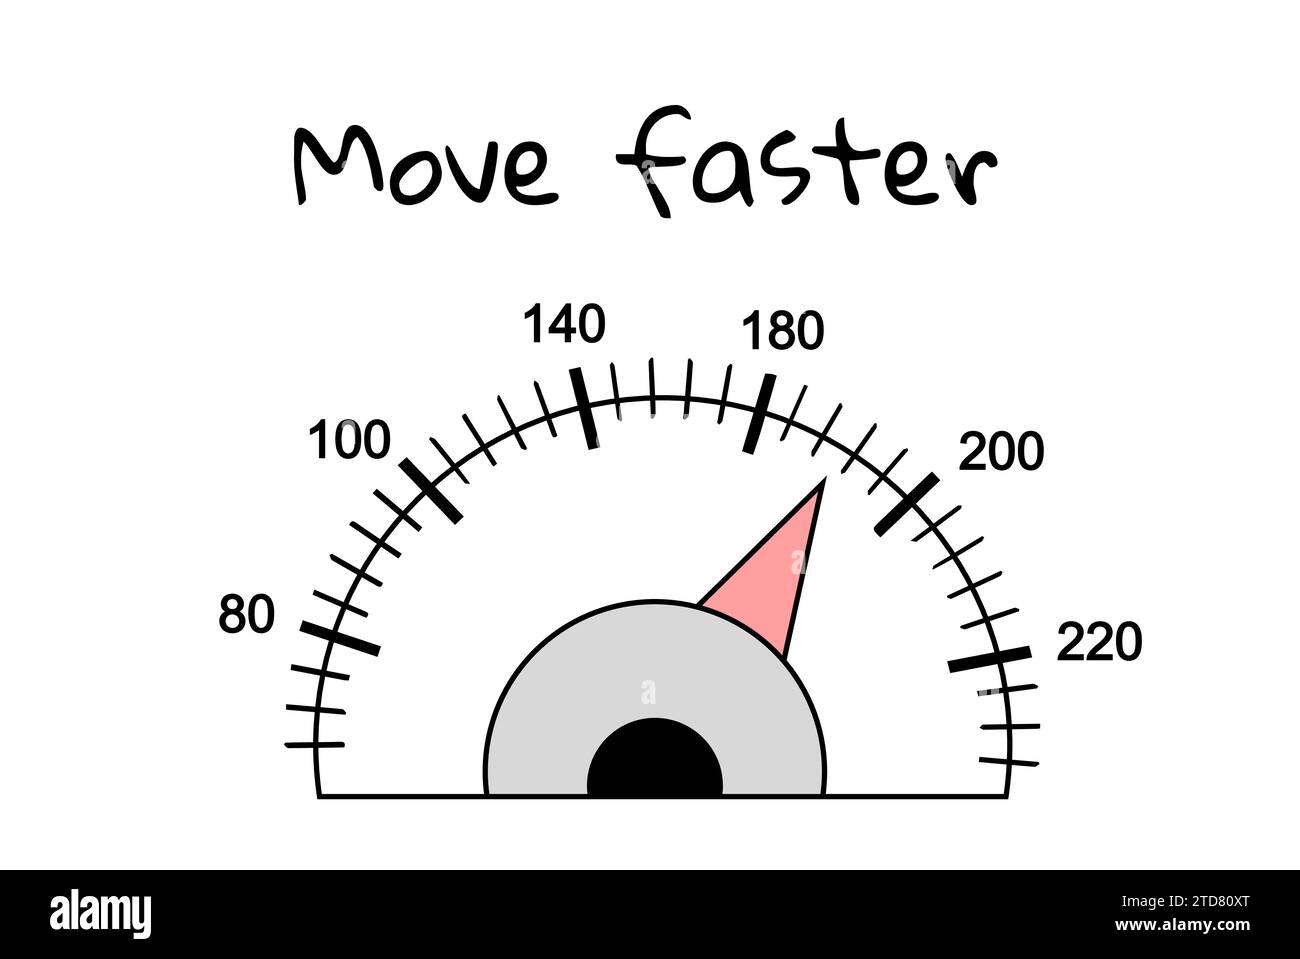 Speedometer. Move Faster. Doodle illustration Stock Vector